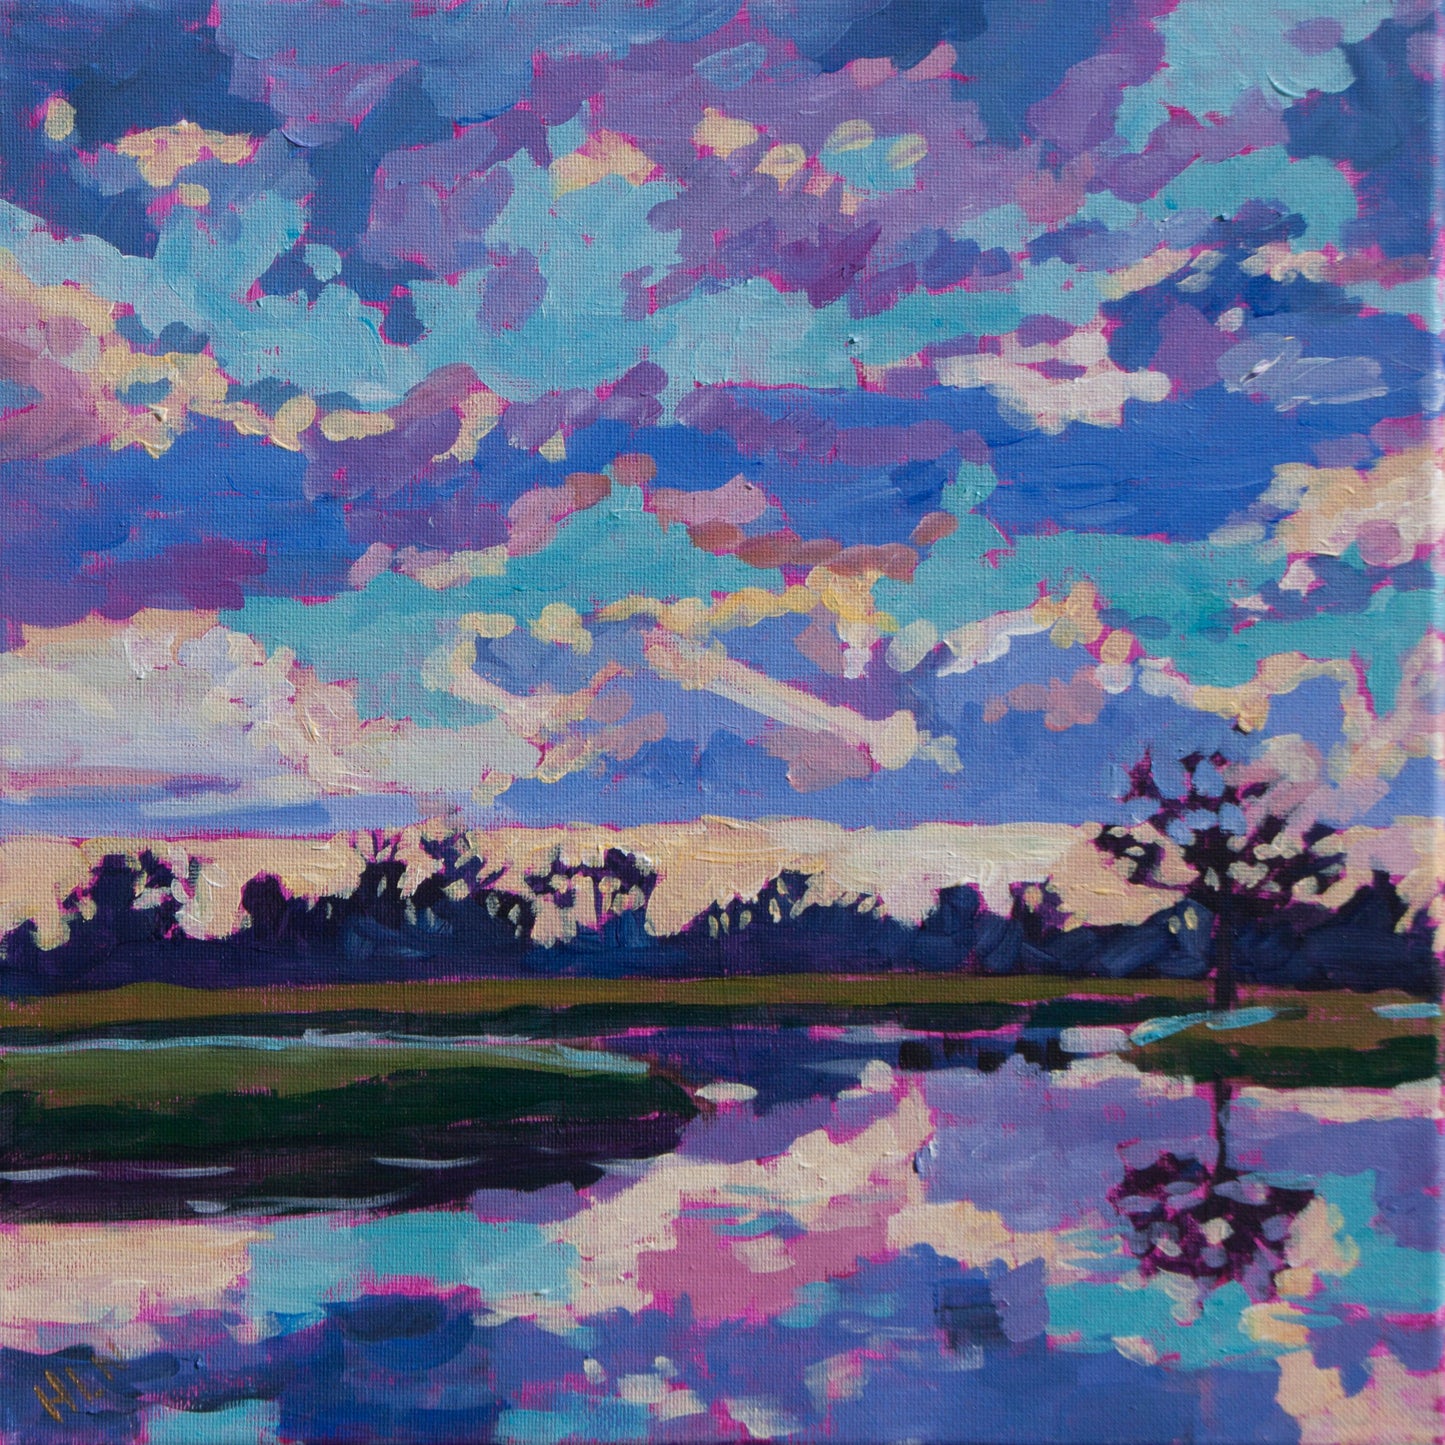 Sunrise painting with loose brush strokes and dramatic clouds with purples and blues